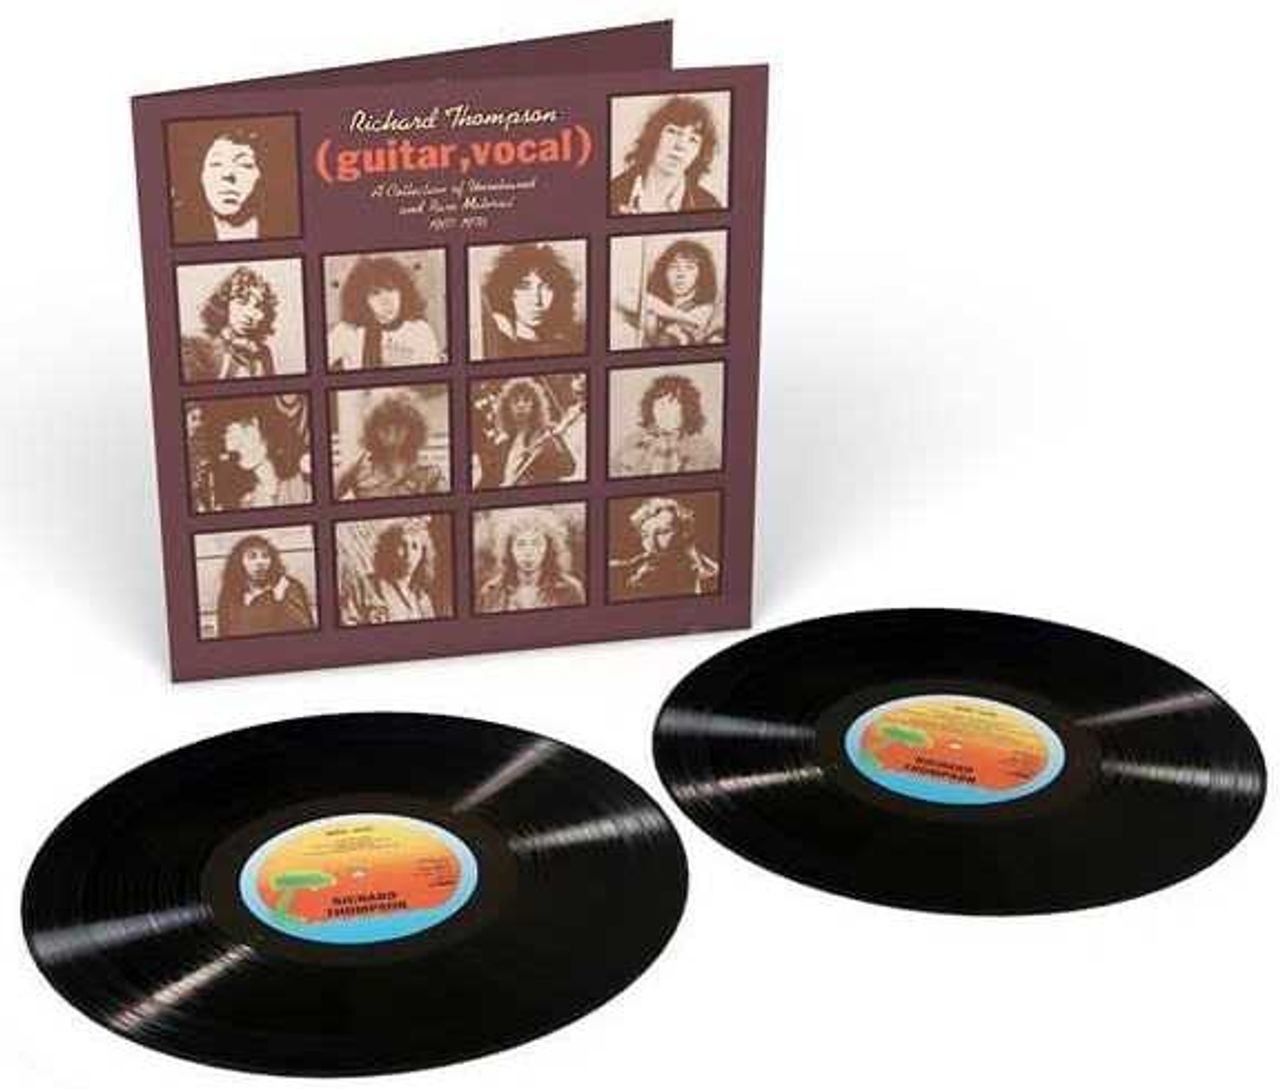 Richard Thompson (guitar,vocal) A Collection Of Unreleased and Rare Material 1967-1976 - Sealed UK 2-LP vinyl record set (Double LP Album) RTH2LGU786930